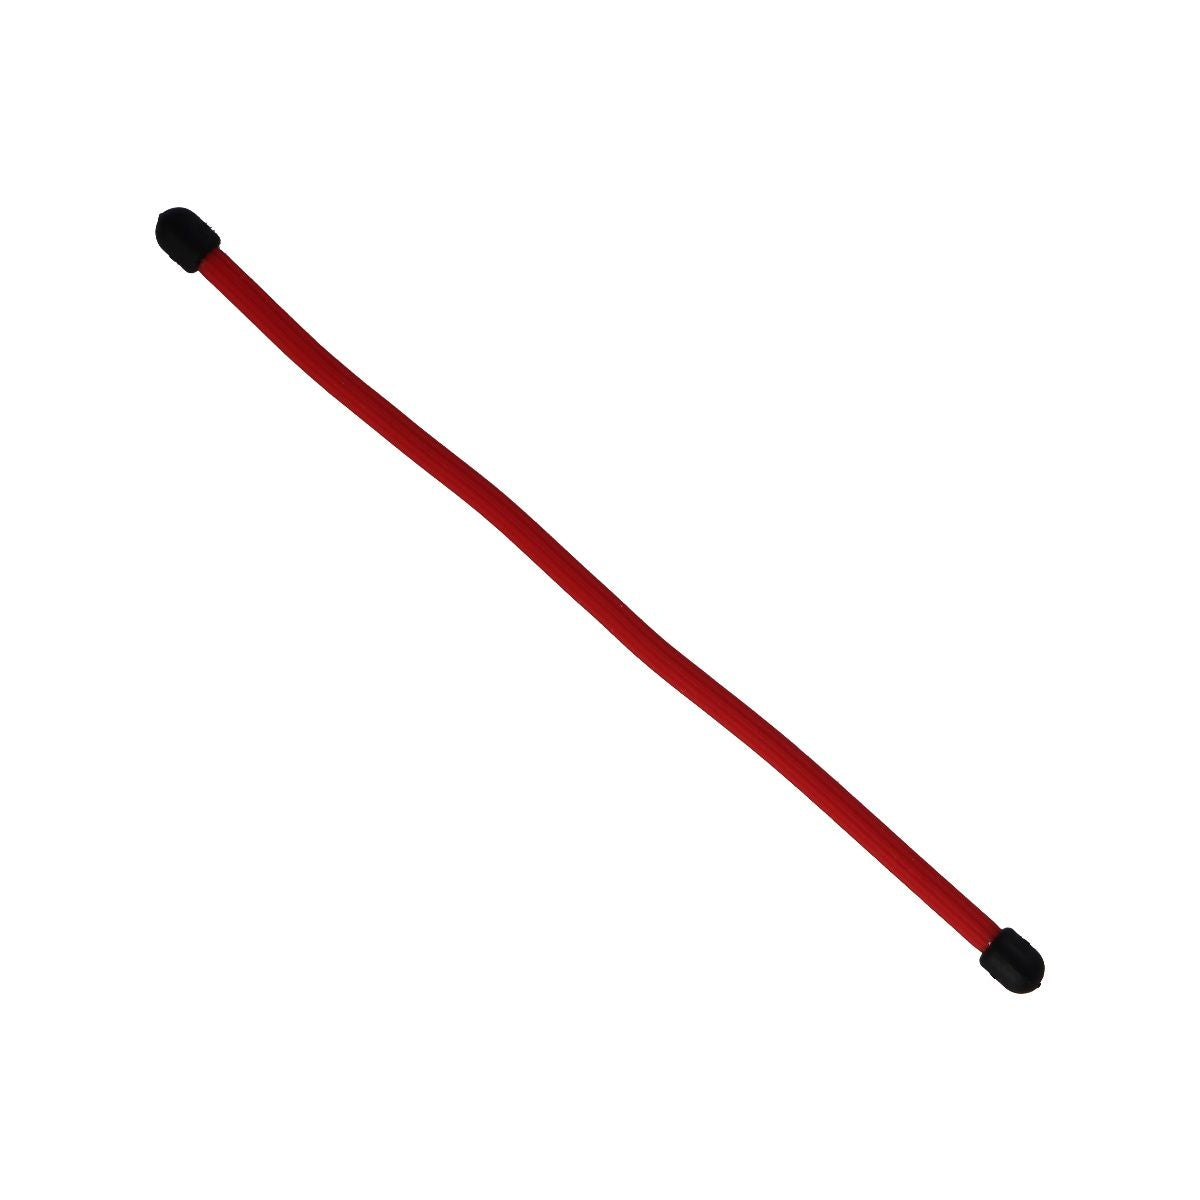 Nite Ize (6-inch) GearTie Re-useable Twist Tie for Cables & More - Red/Black Other Sporting Goods Nite Ize    - Simple Cell Bulk Wholesale Pricing - USA Seller